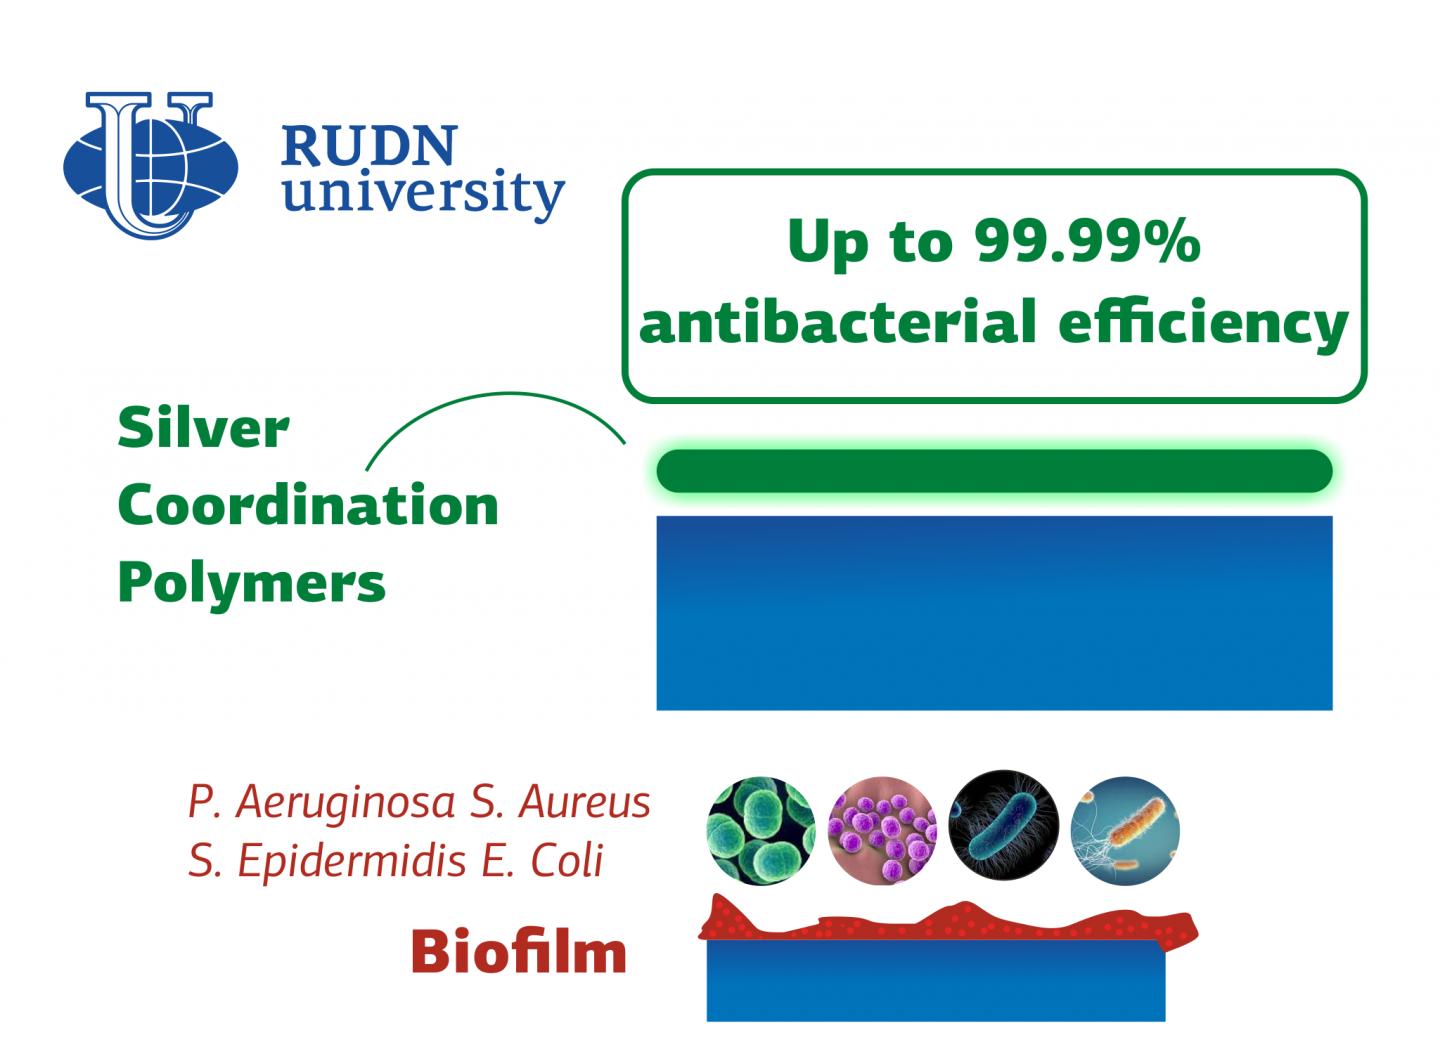 RUDN University Chemist Created Coordination Polymers Films with up to 99.99% antibacterial efficiency